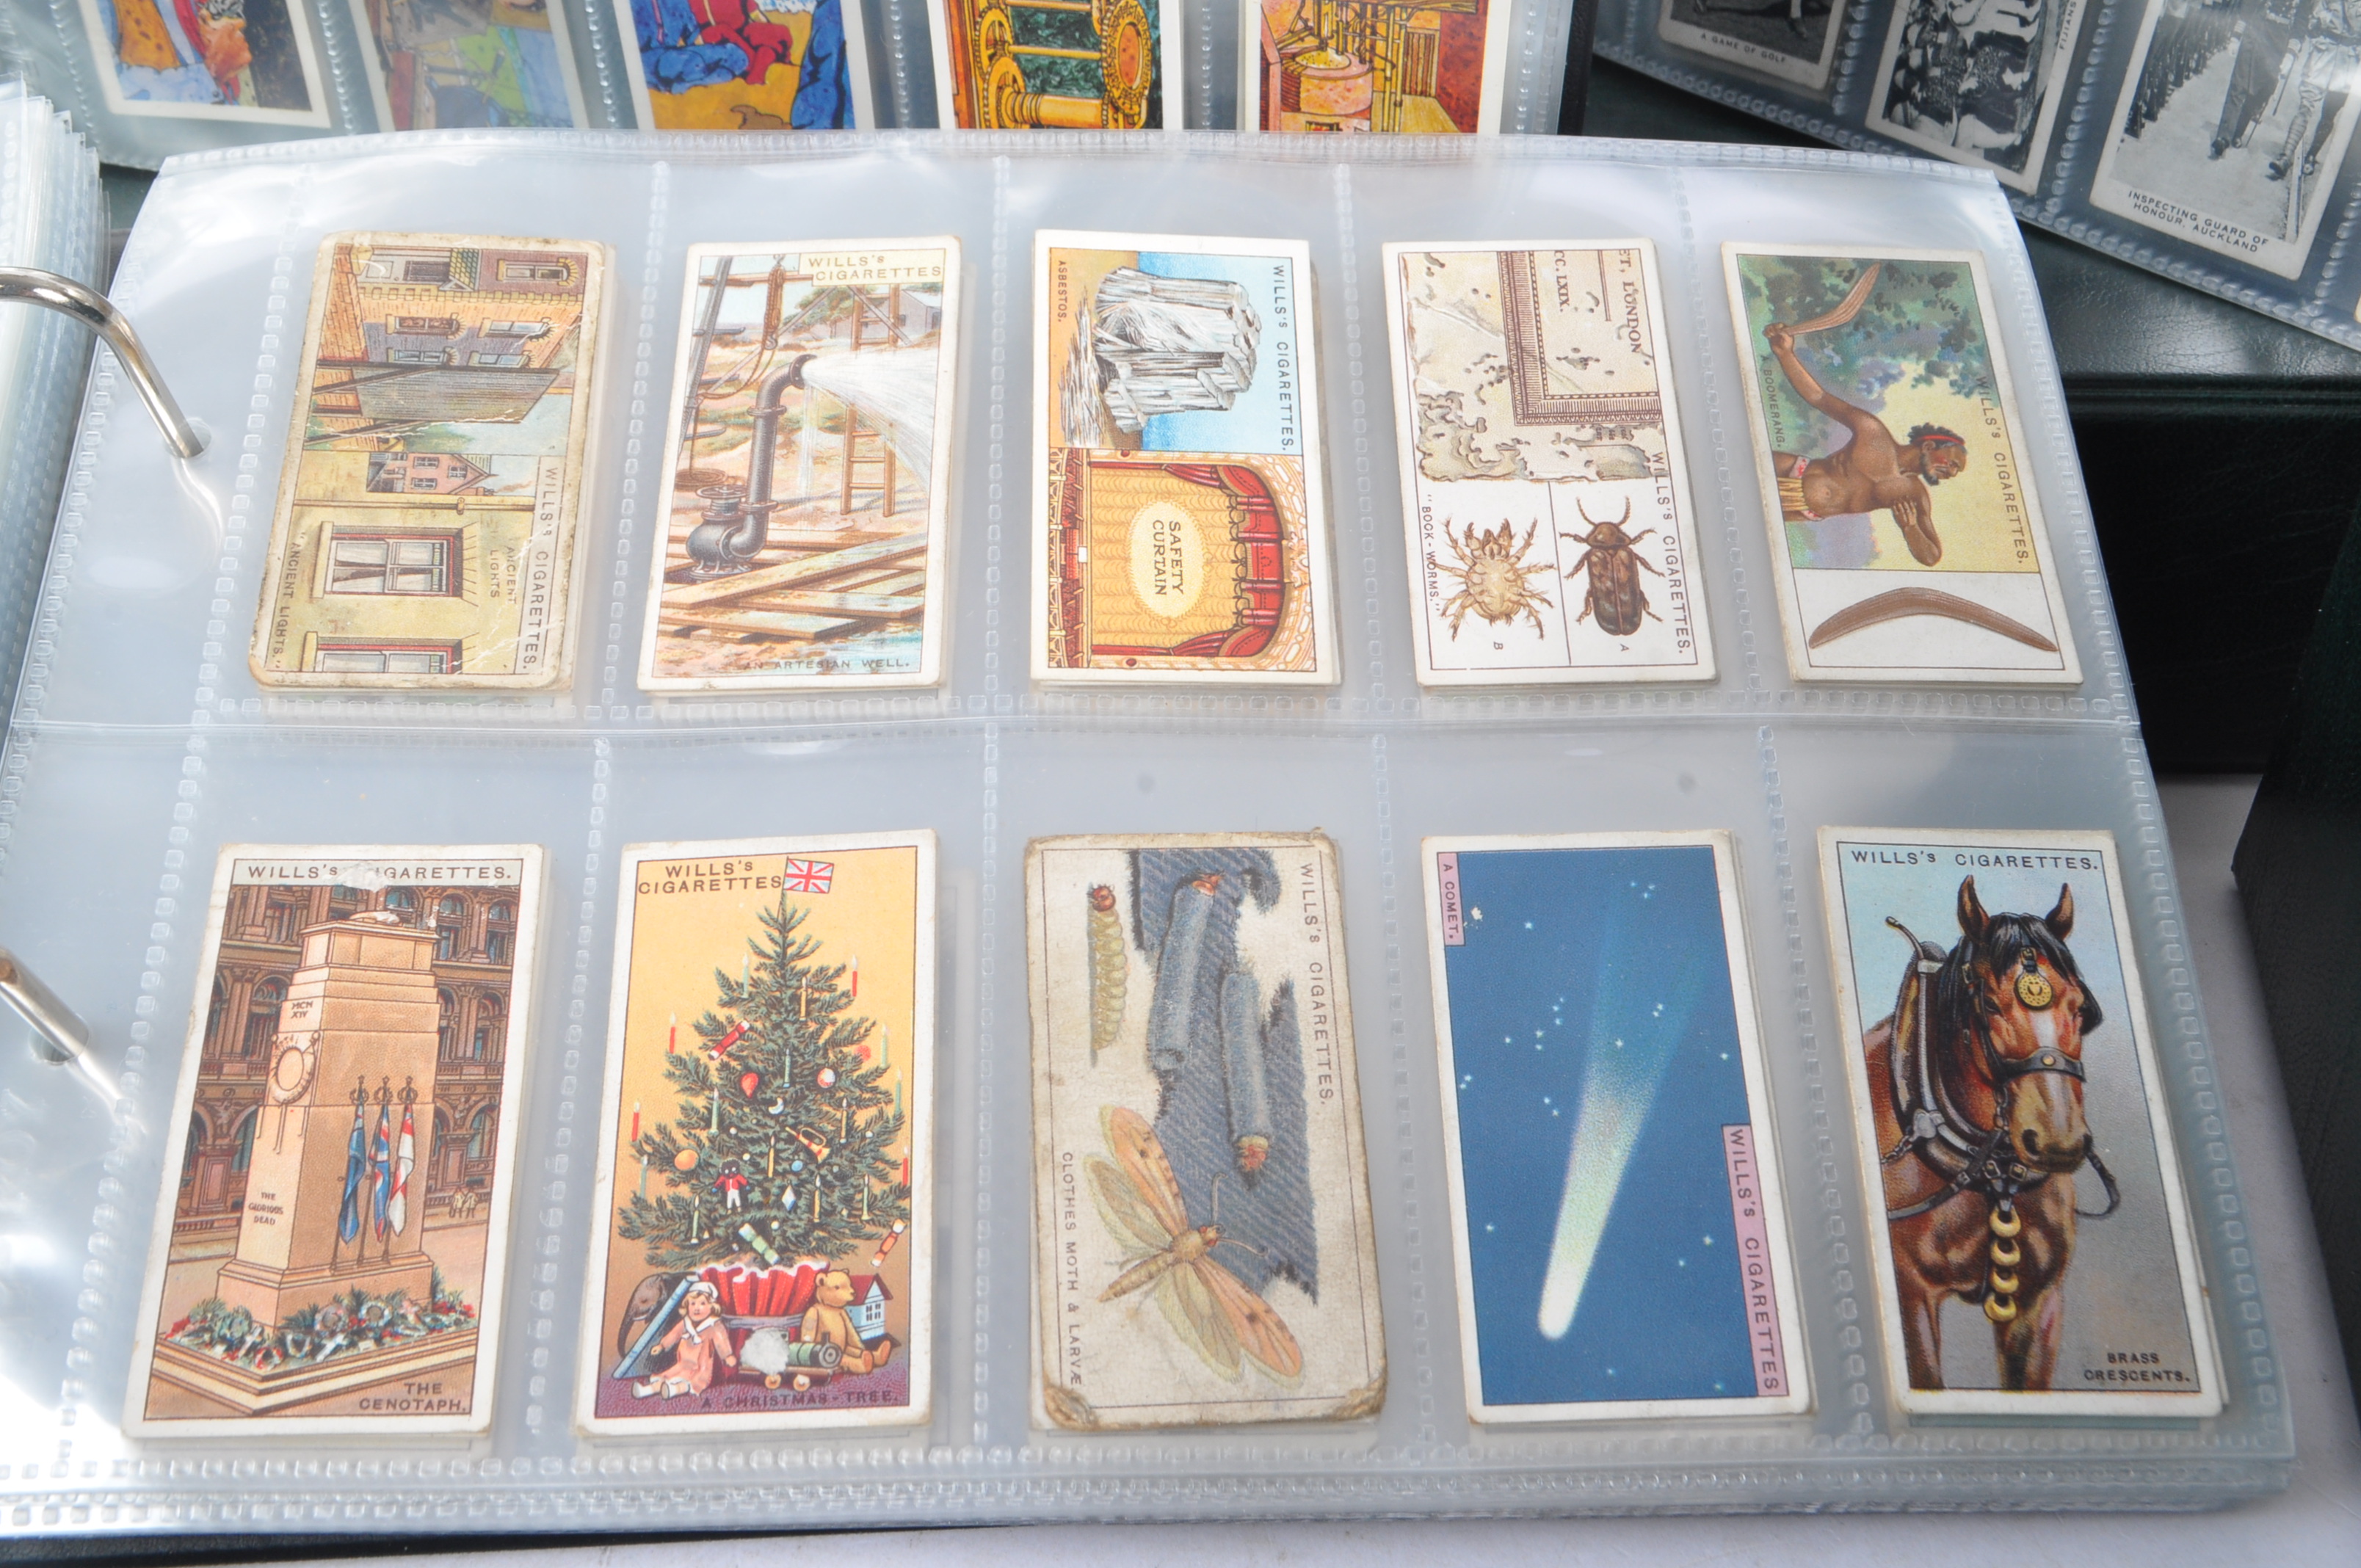 LARGE EXTENSIVE COLLECTION OF CIGARETTE CARDS & OTHERS - Image 2 of 8